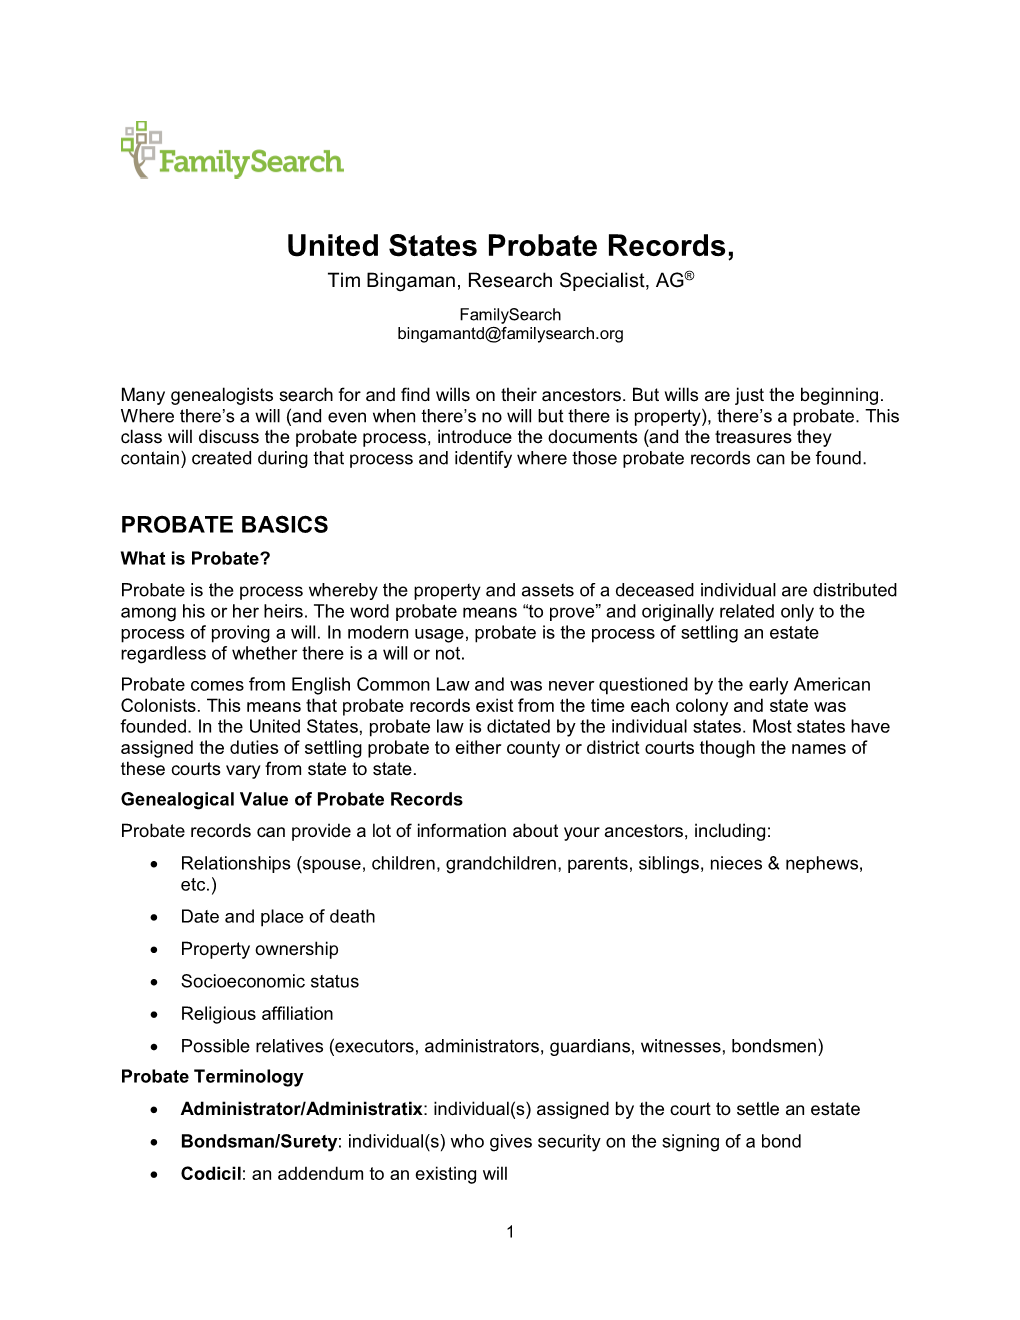 United States Probate Records, Tim Bingaman, Research Specialist, AG® Familysearch Bingamantd@Familysearch.Org